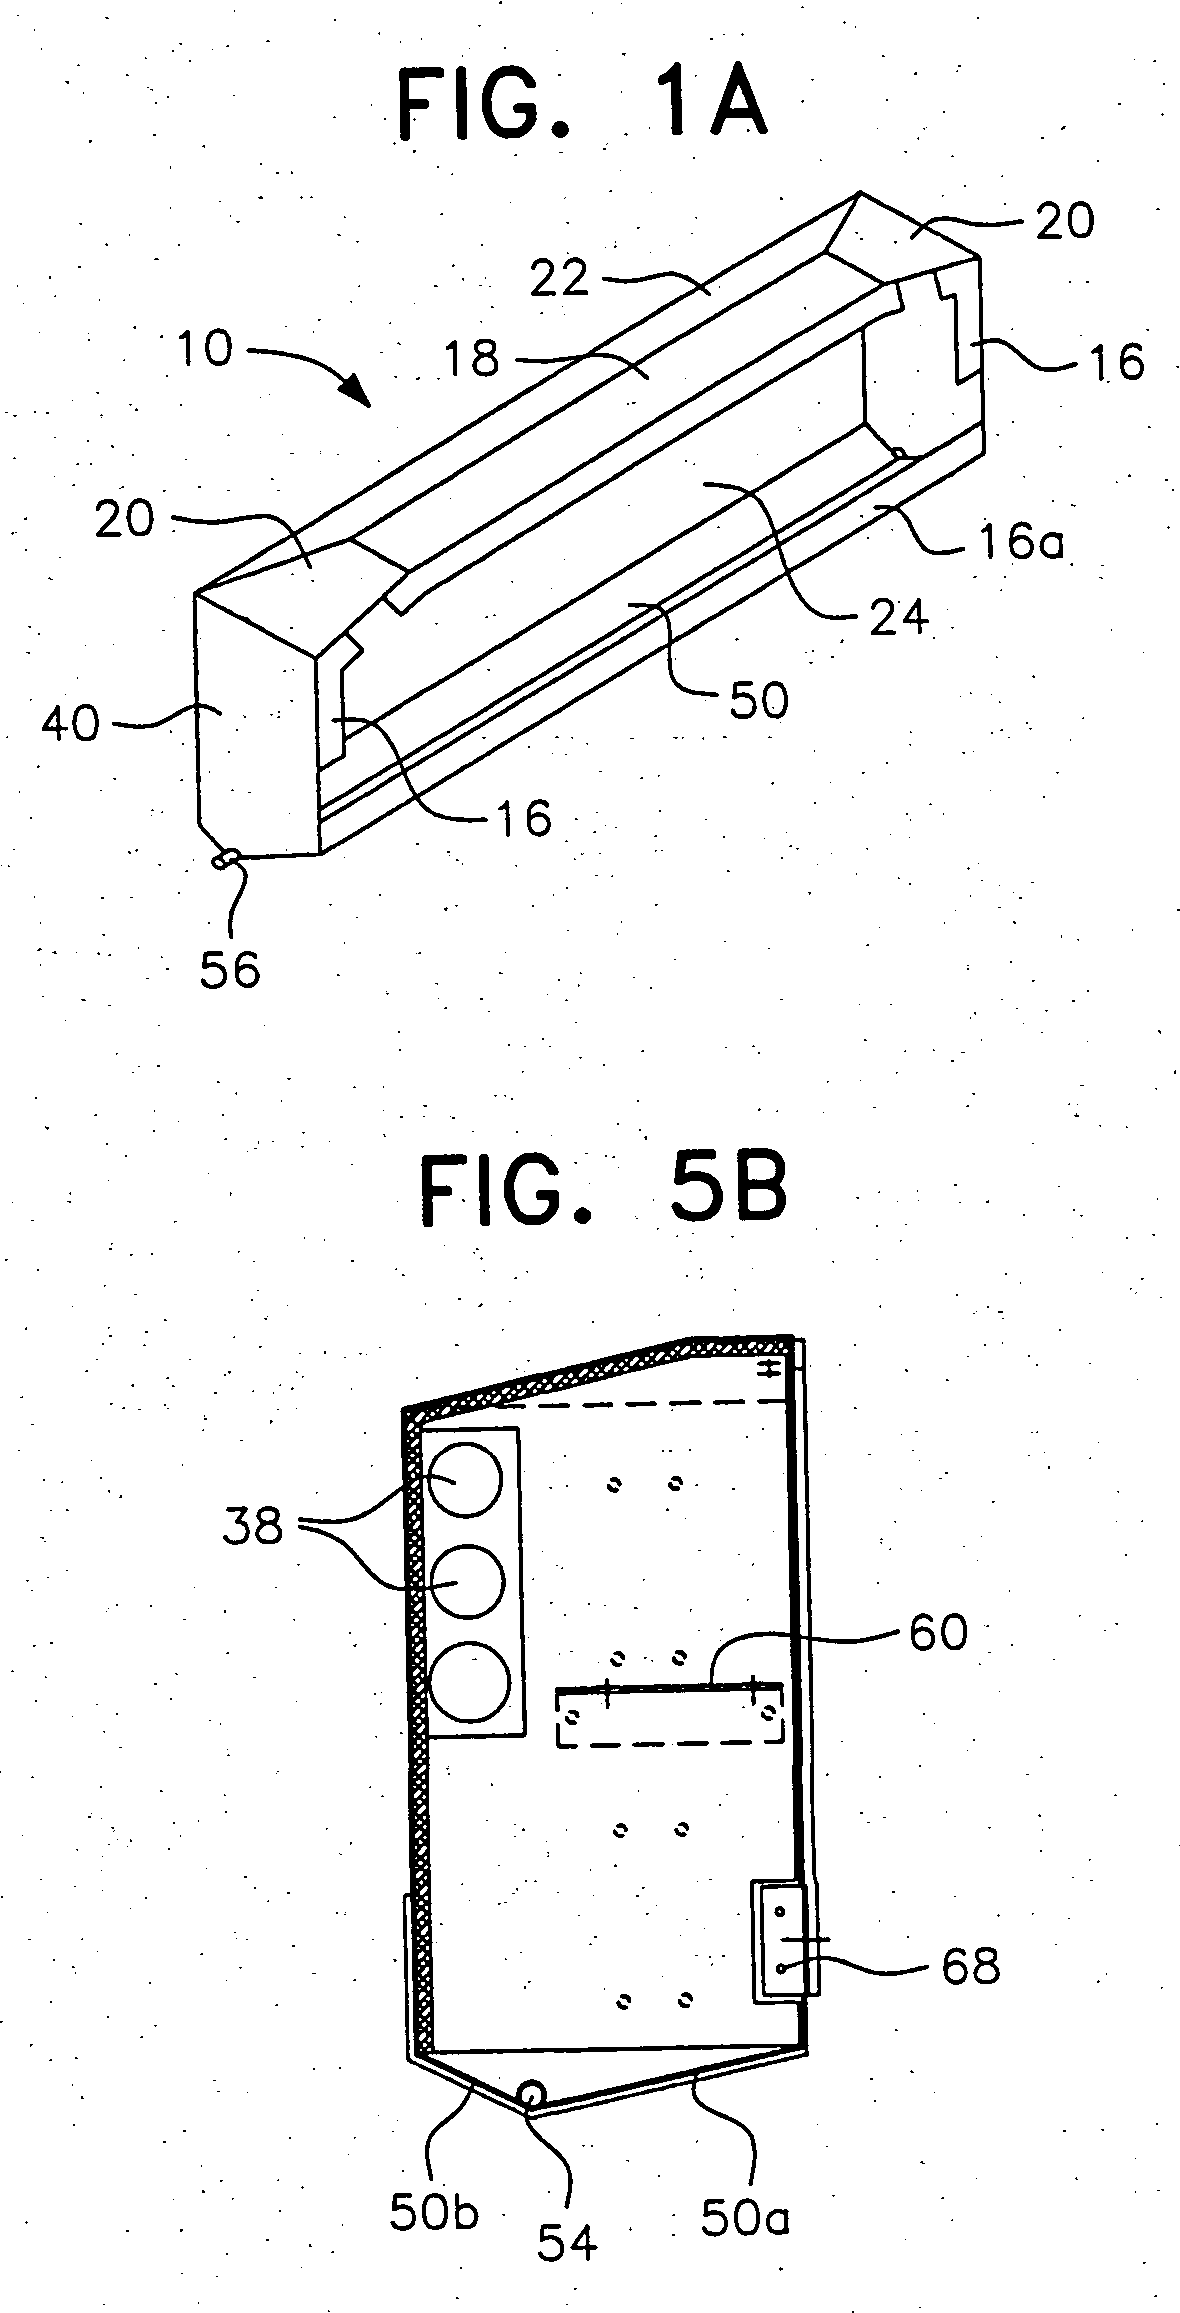 Self-contained flush-mount bulkhead air conditioning unit with novel evaporator/blower assembly housing